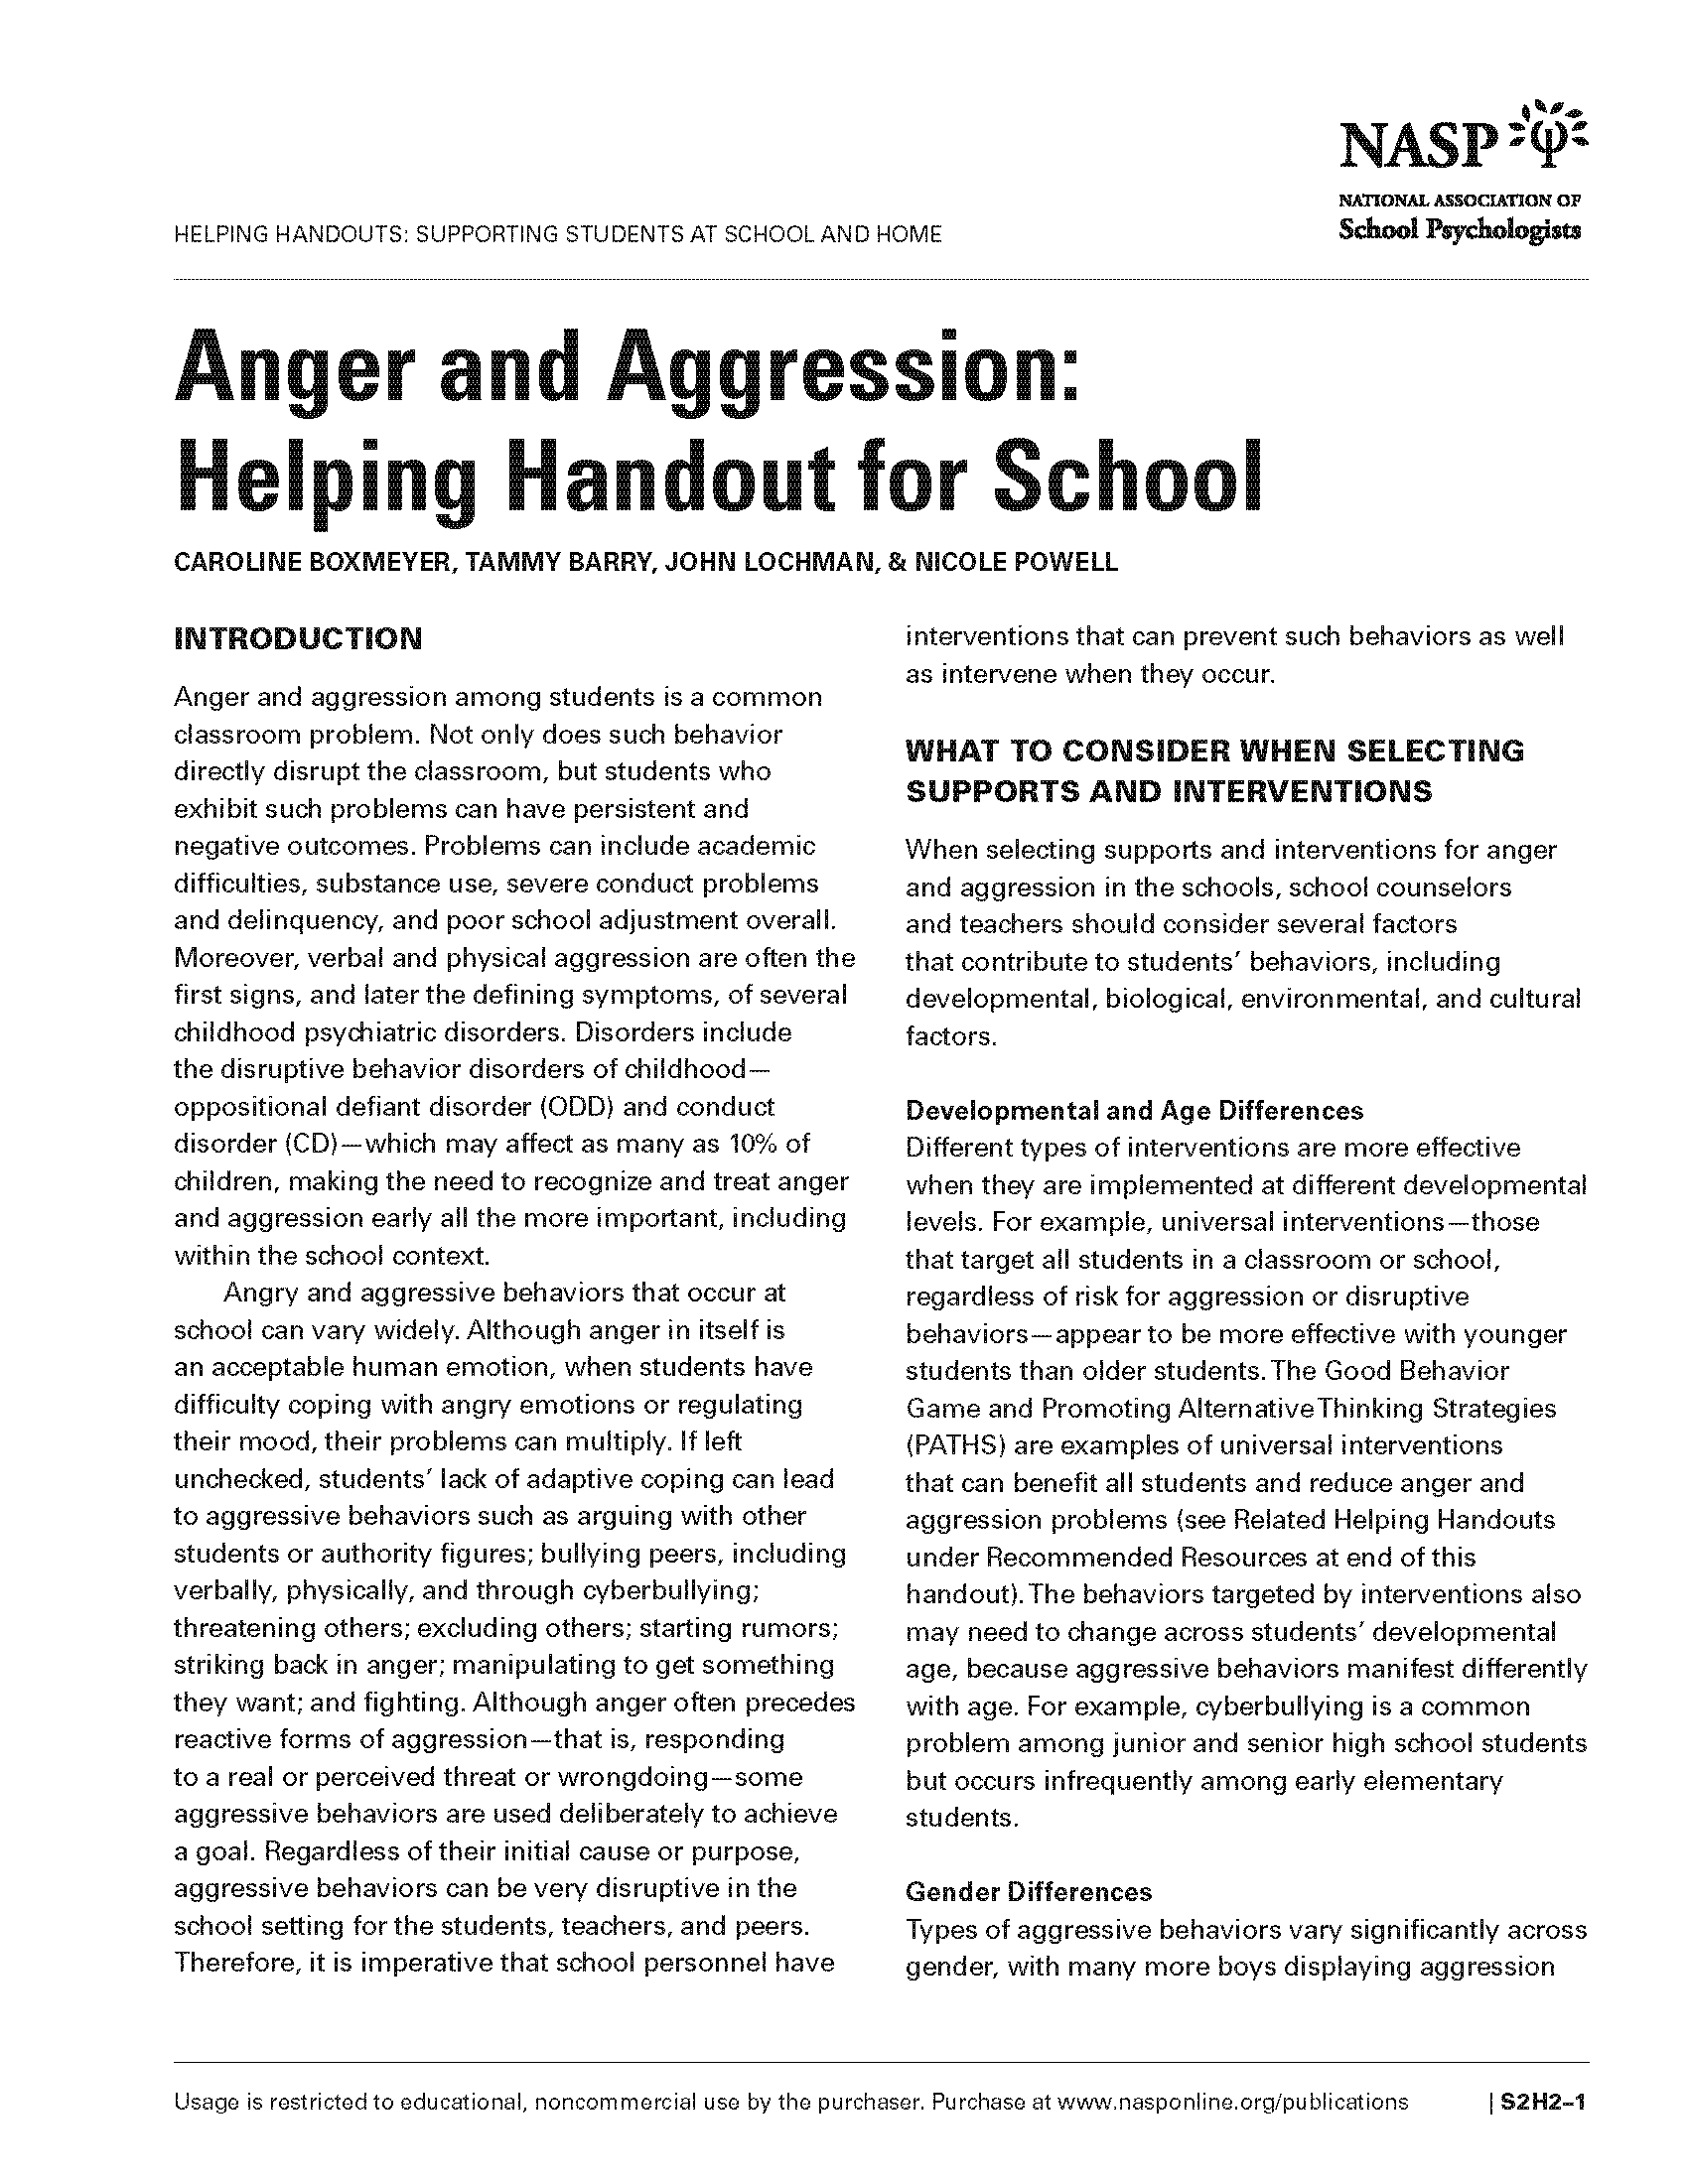 Anger and Aggression: Helping Handout for School